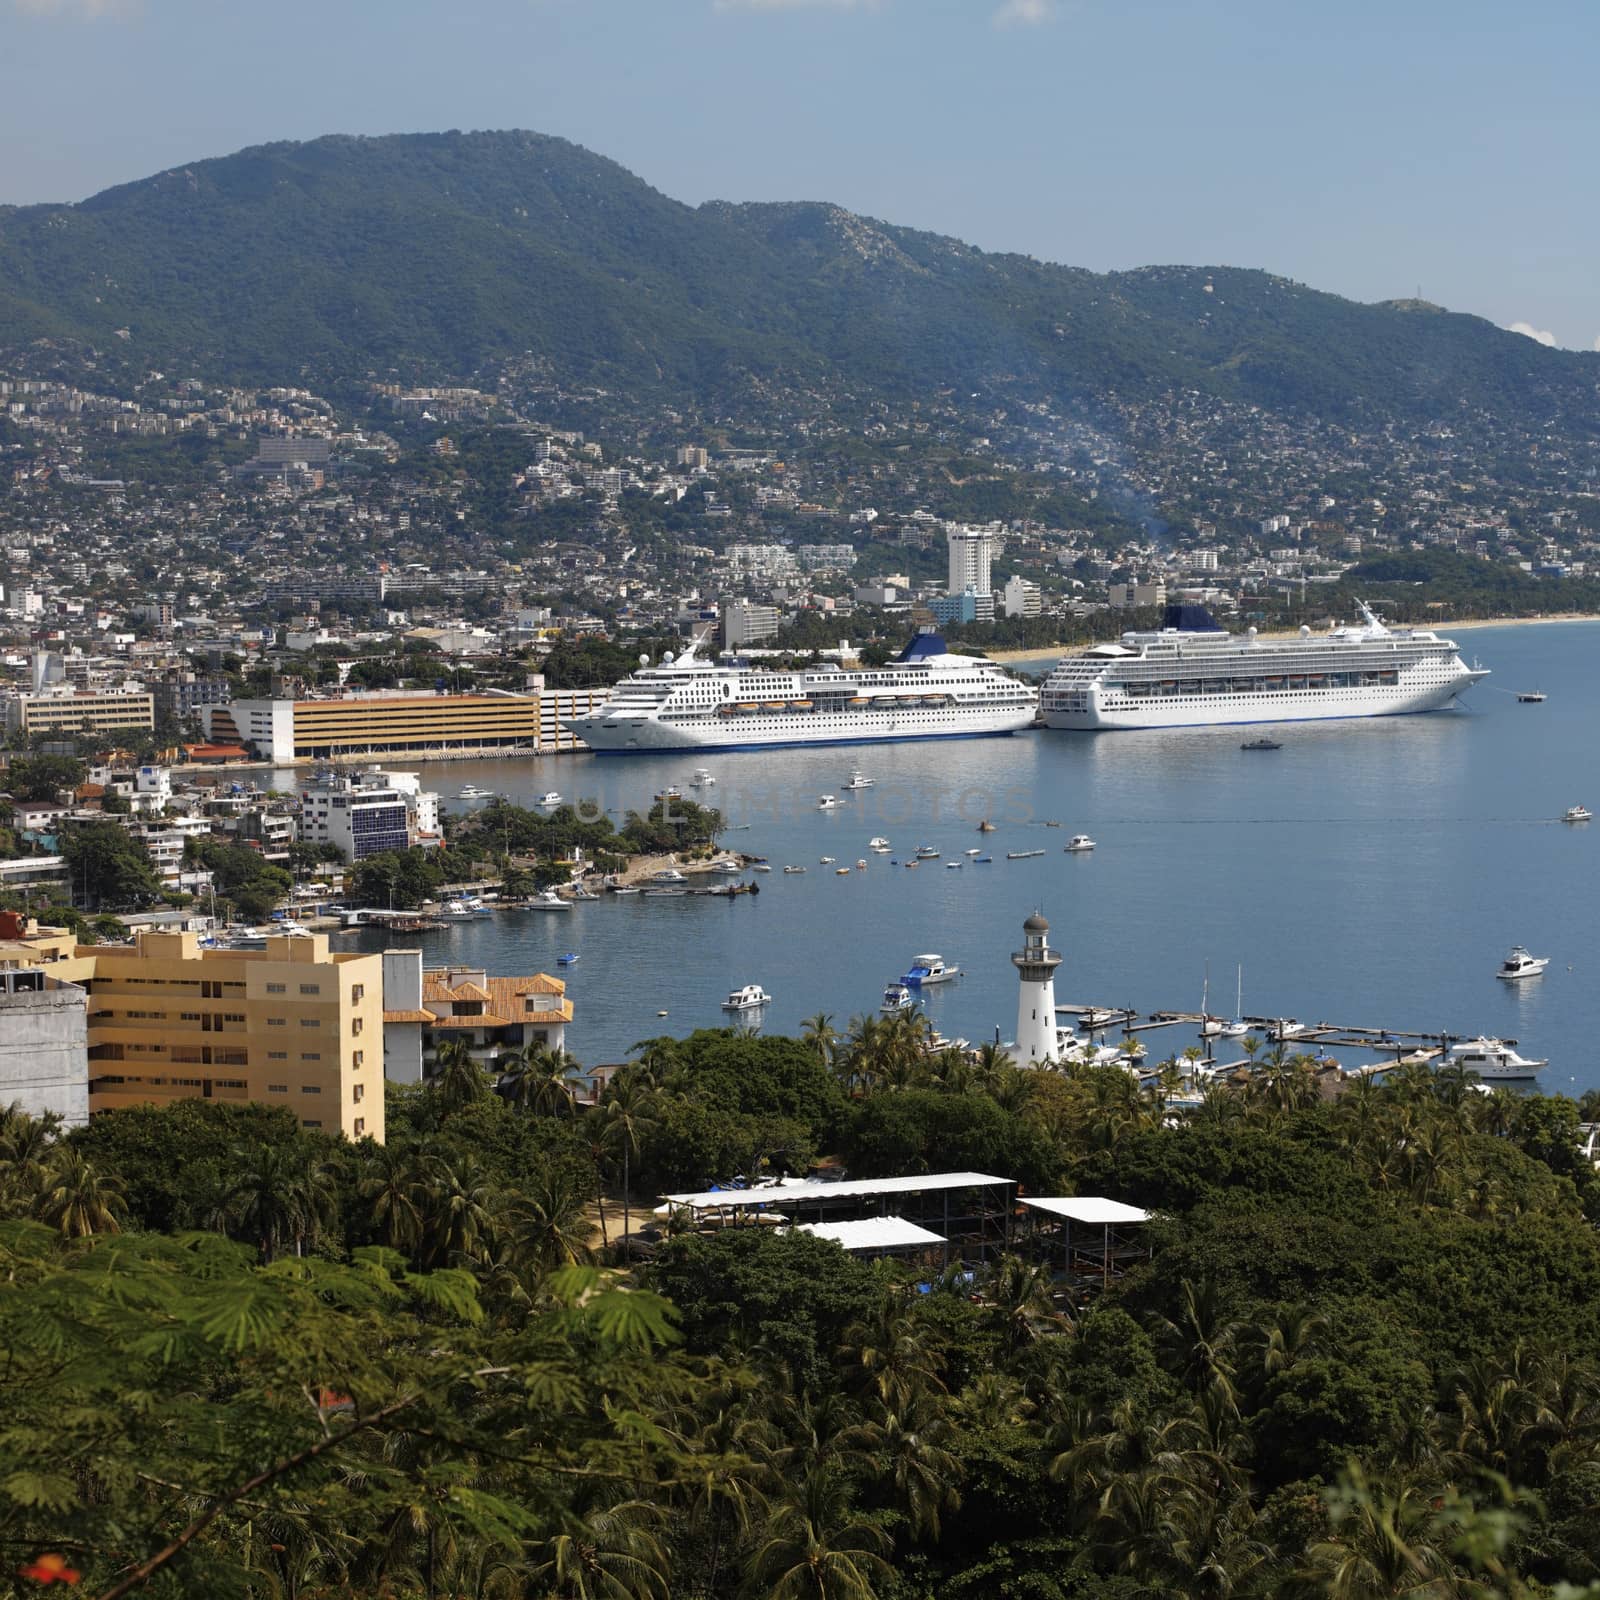 Cruise ships in Acapulco Bay on the Pacific coast of Mexico